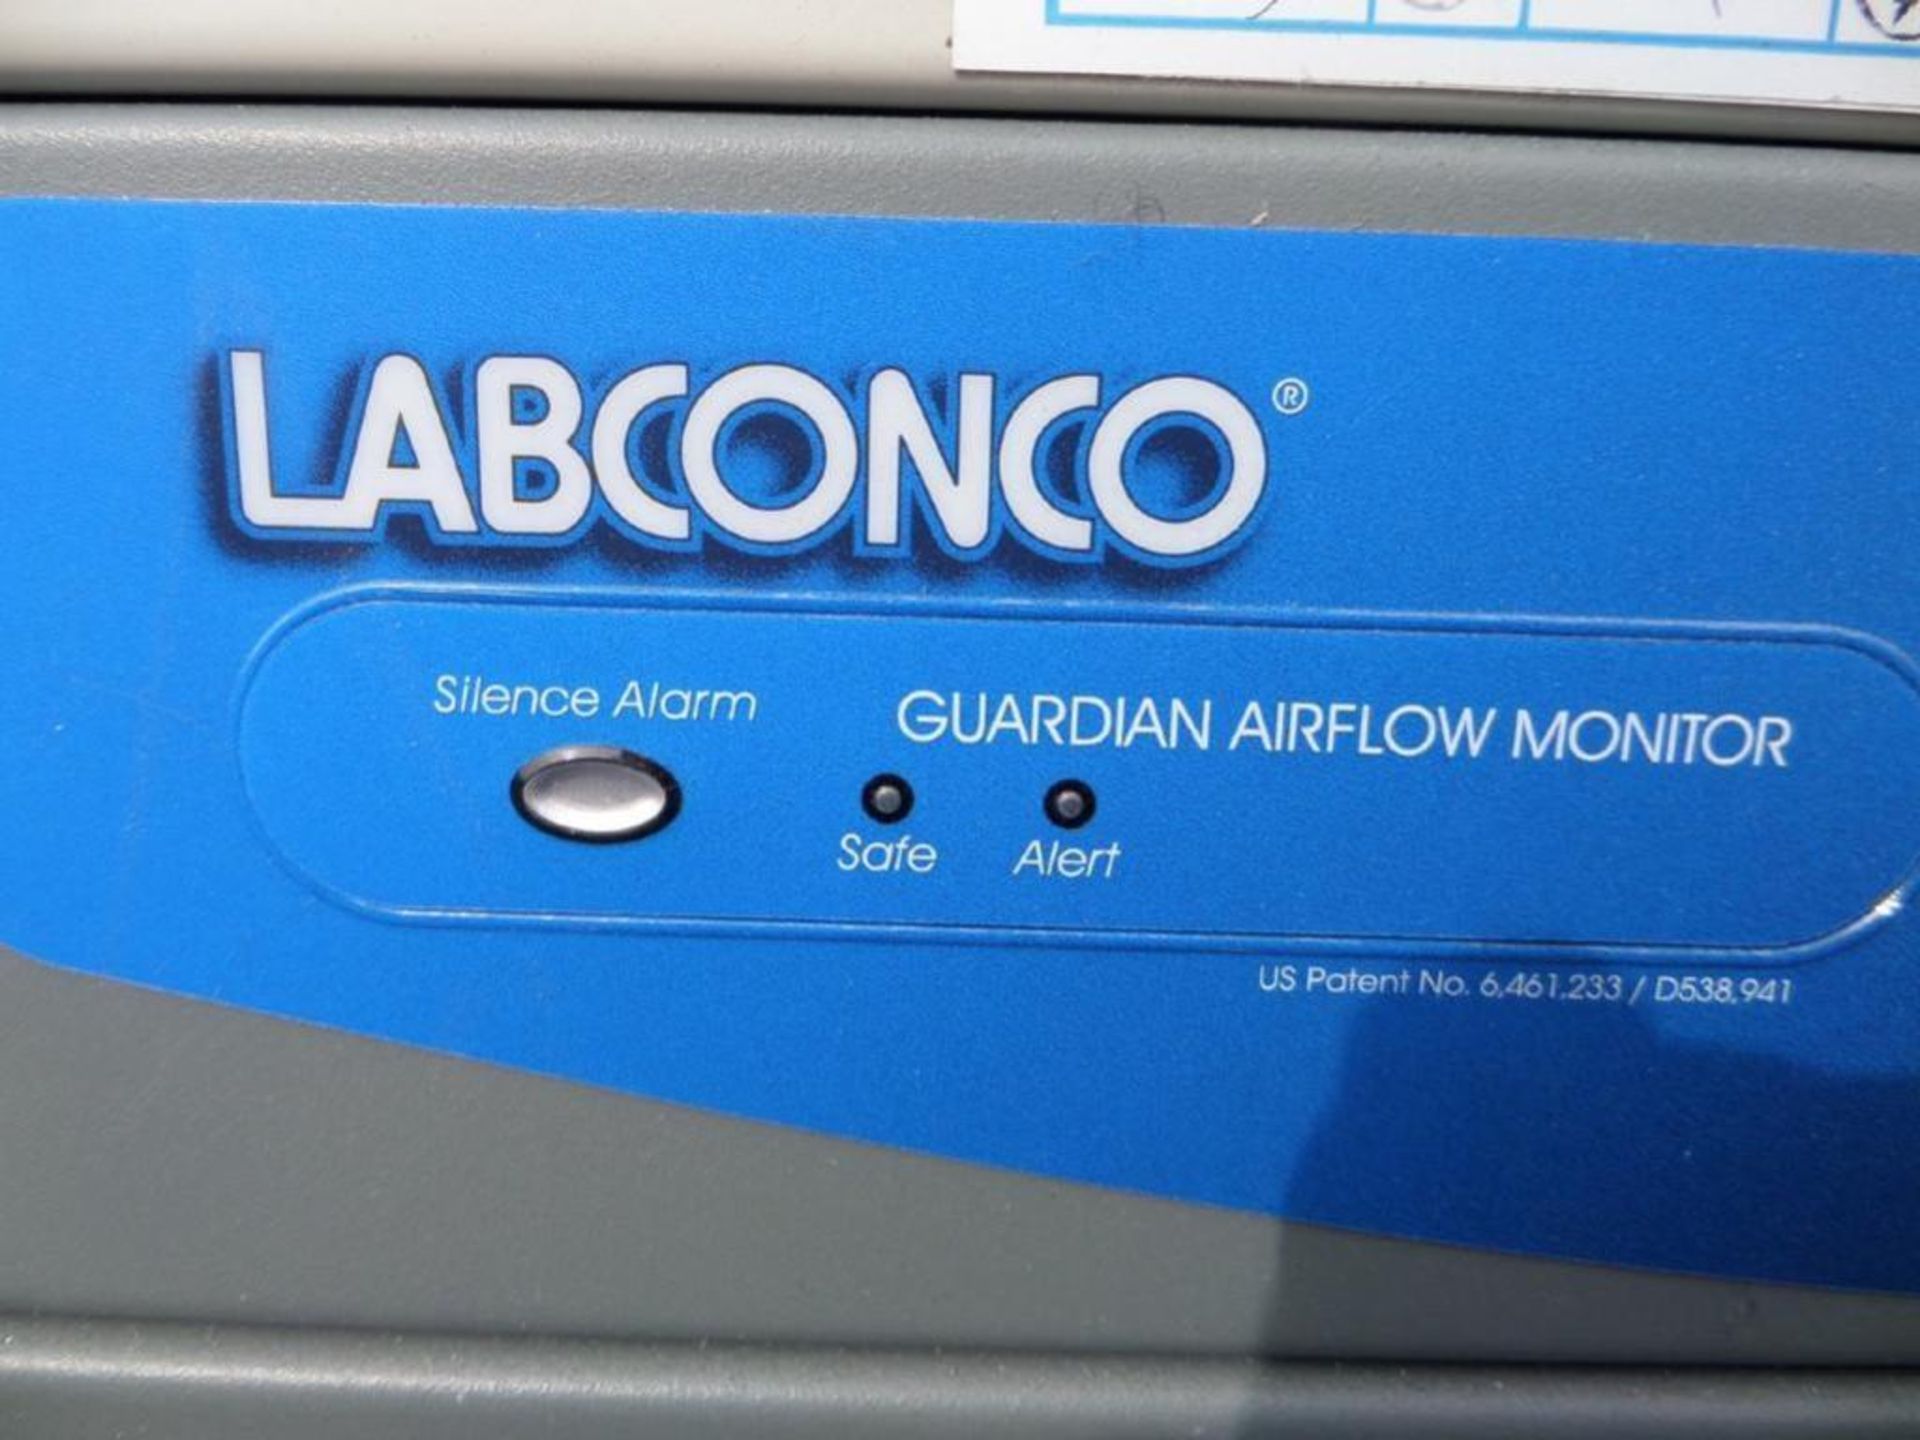 Labconco Filtered Balanced Safety Cabinet - Image 11 of 22